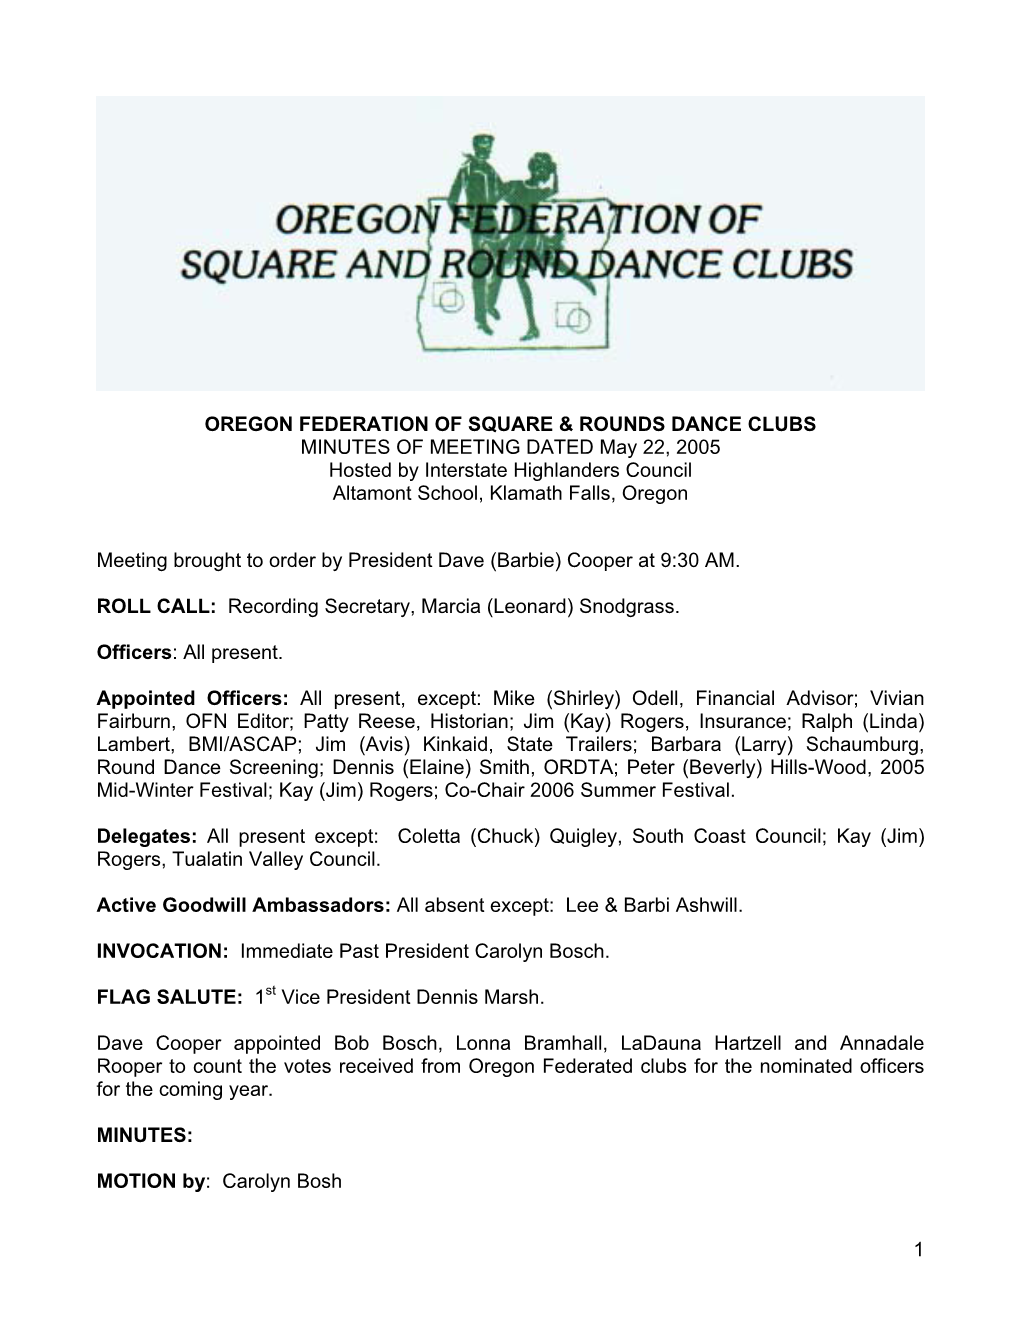 1 Oregon Federation of Square & Rounds Dance